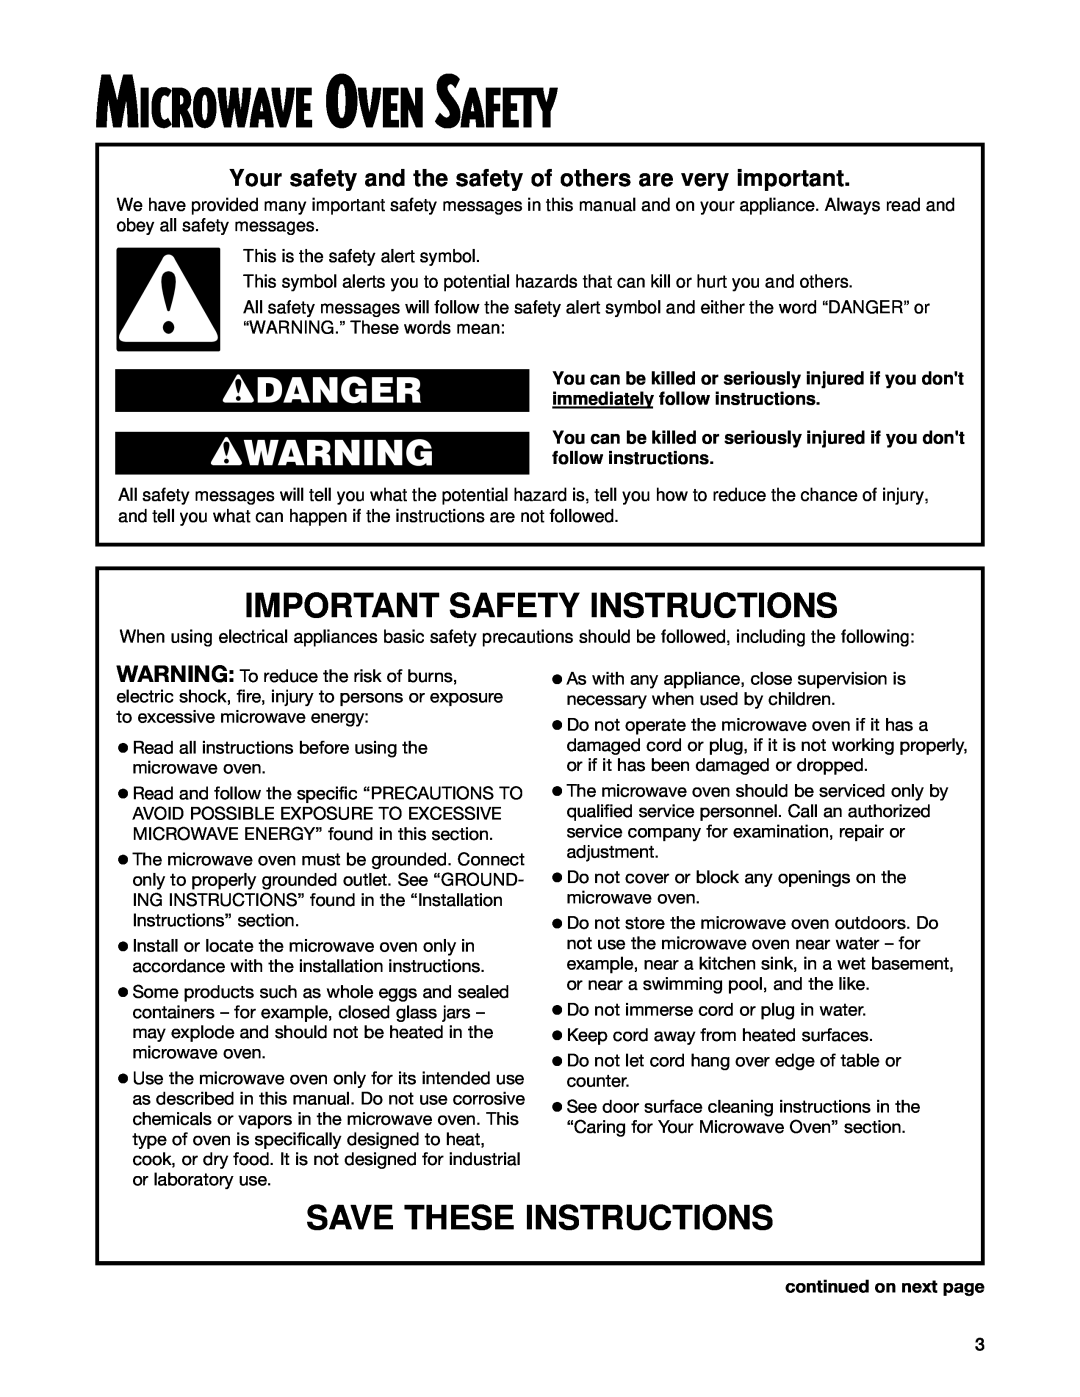 Whirlpool MT3130SH Microwave Oven Safety, wDANGER wWARNING, Important Safety Instructions, Save These Instructions 